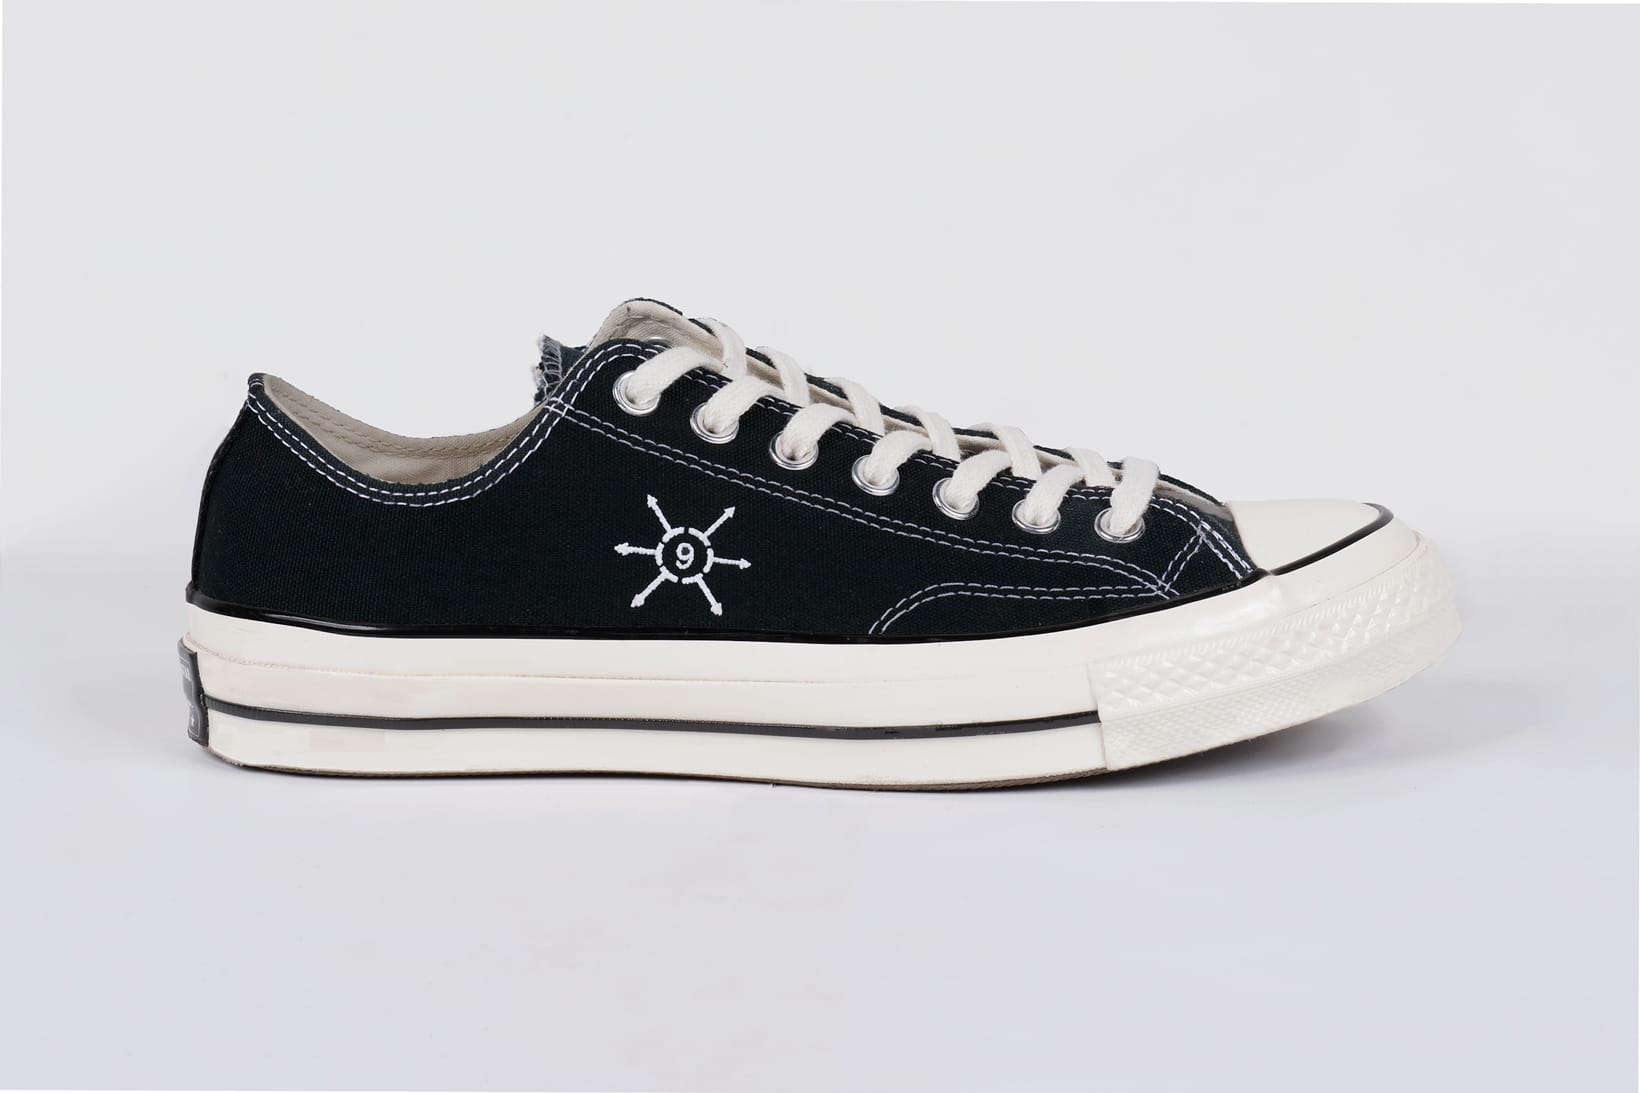 converse shoes nordstrom